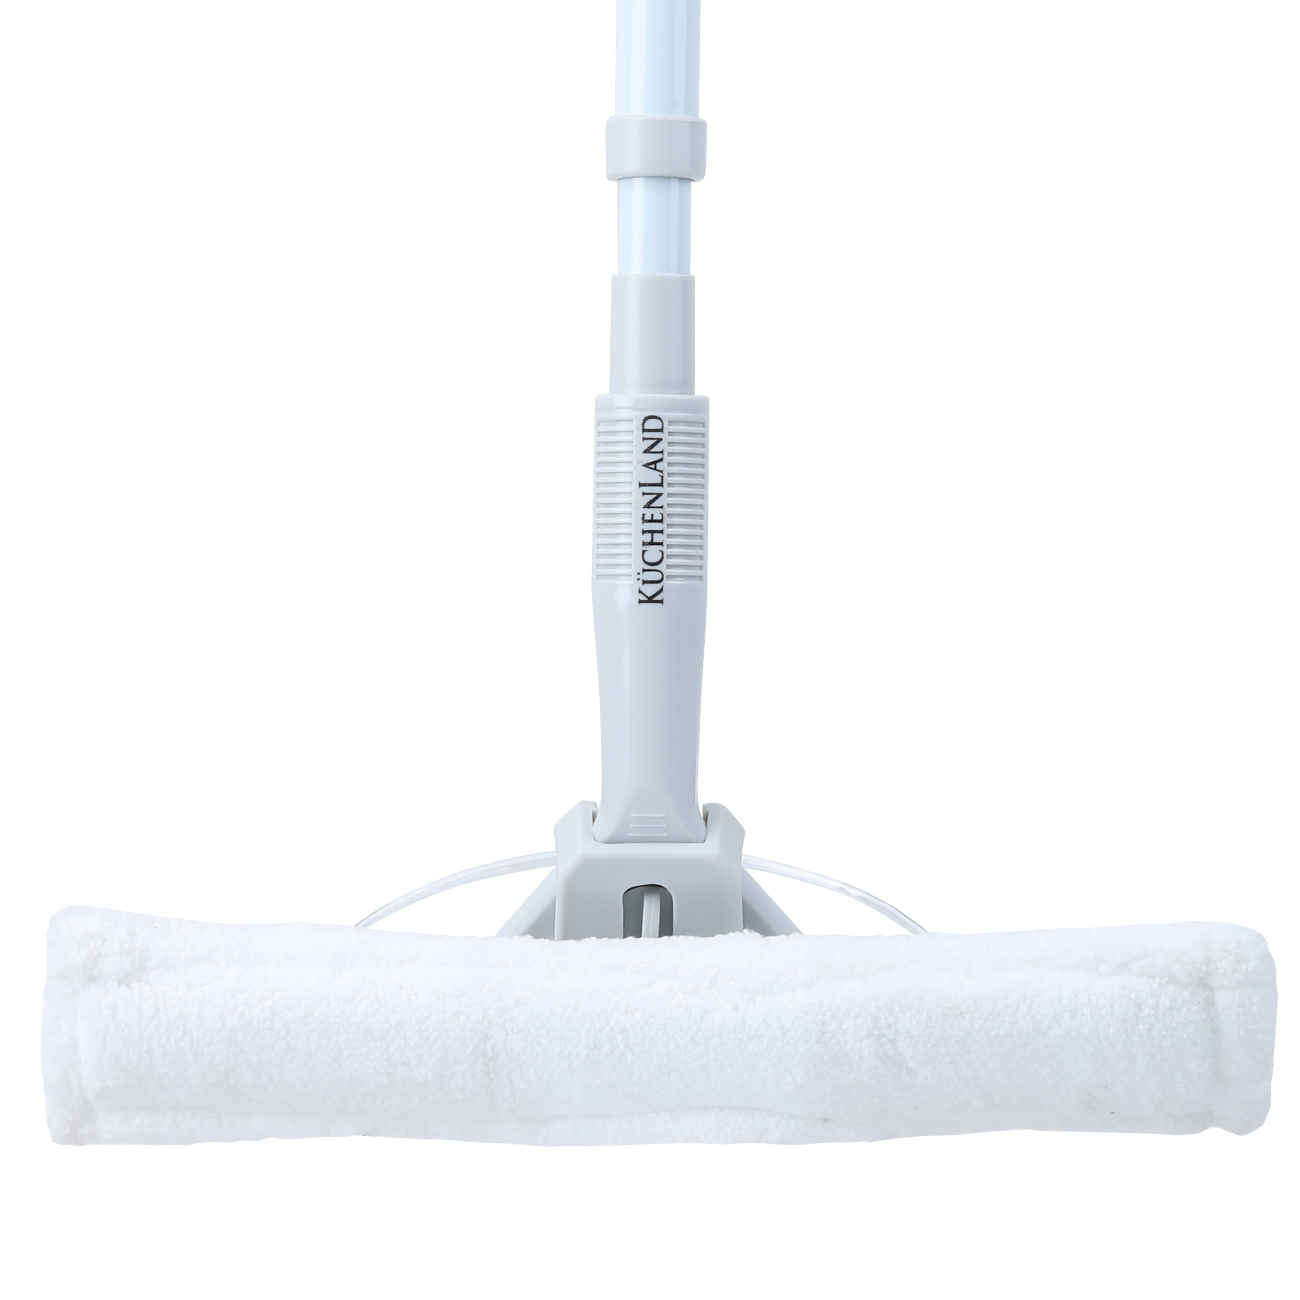 Window cleaning mop, with rag and scraper, white-grey, Clean изображение № 3